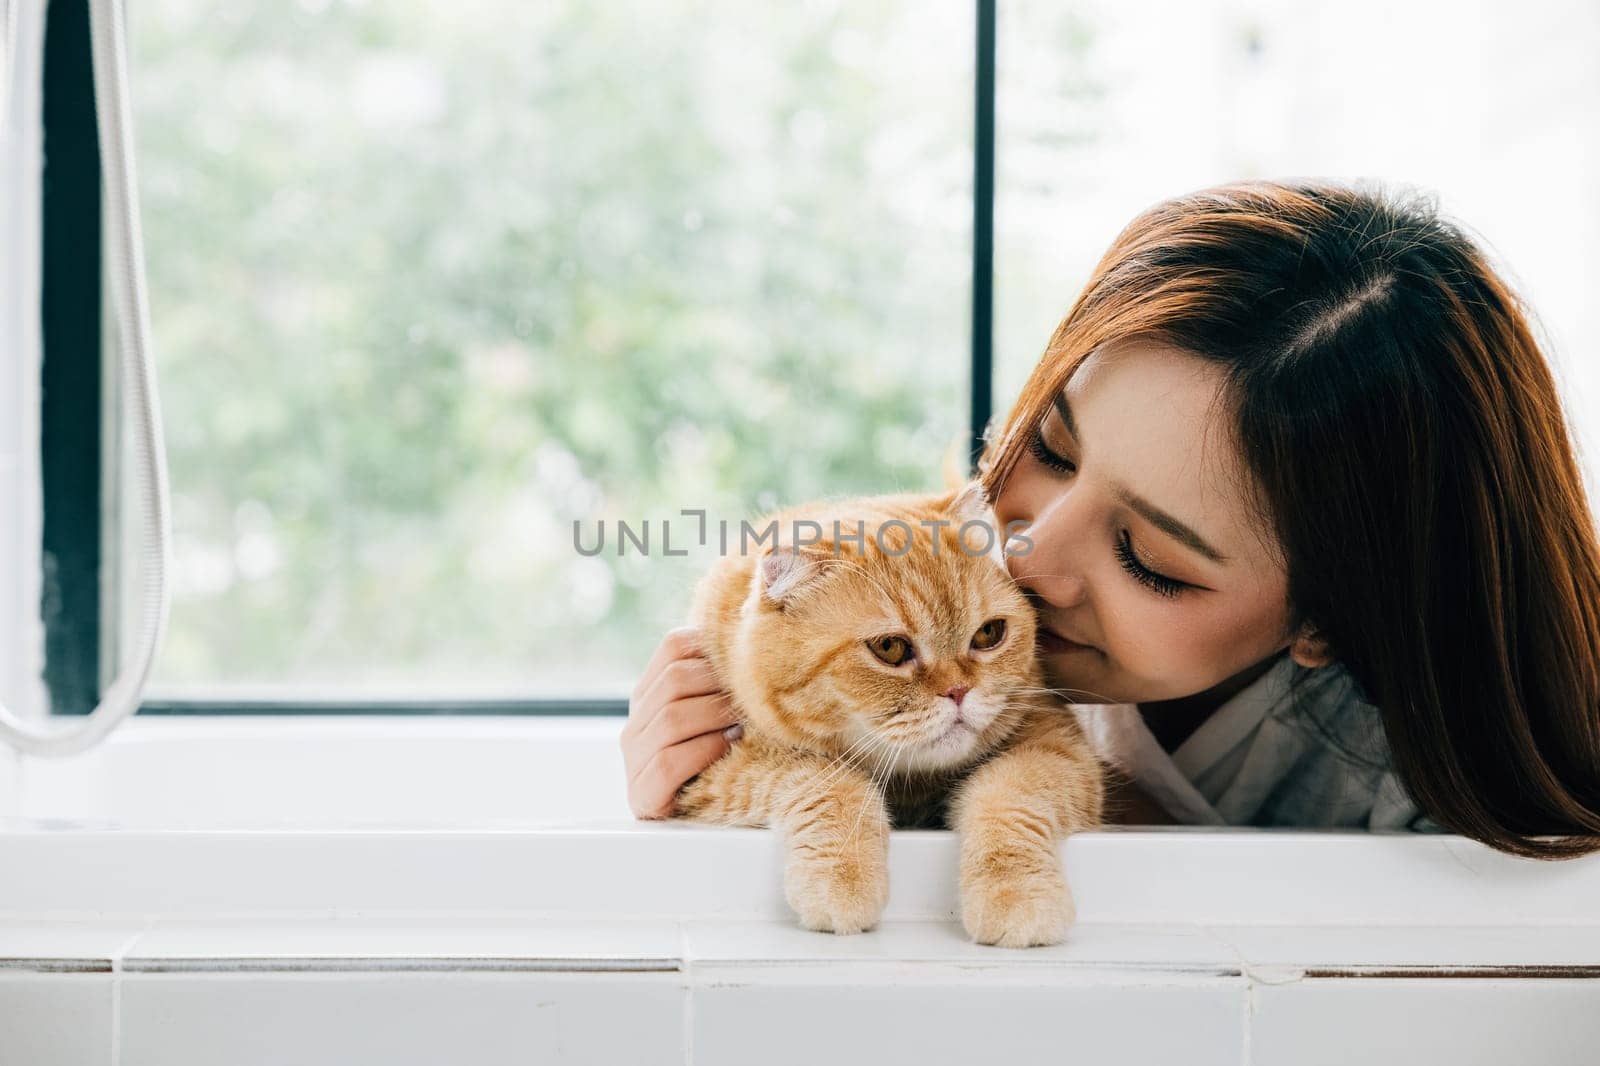 A beautiful bathroom portrait, An adult woman finds happiness in her bath as she holds her Scottish Fold cat, a perfect blend of owner-pet love and peaceful solitude.